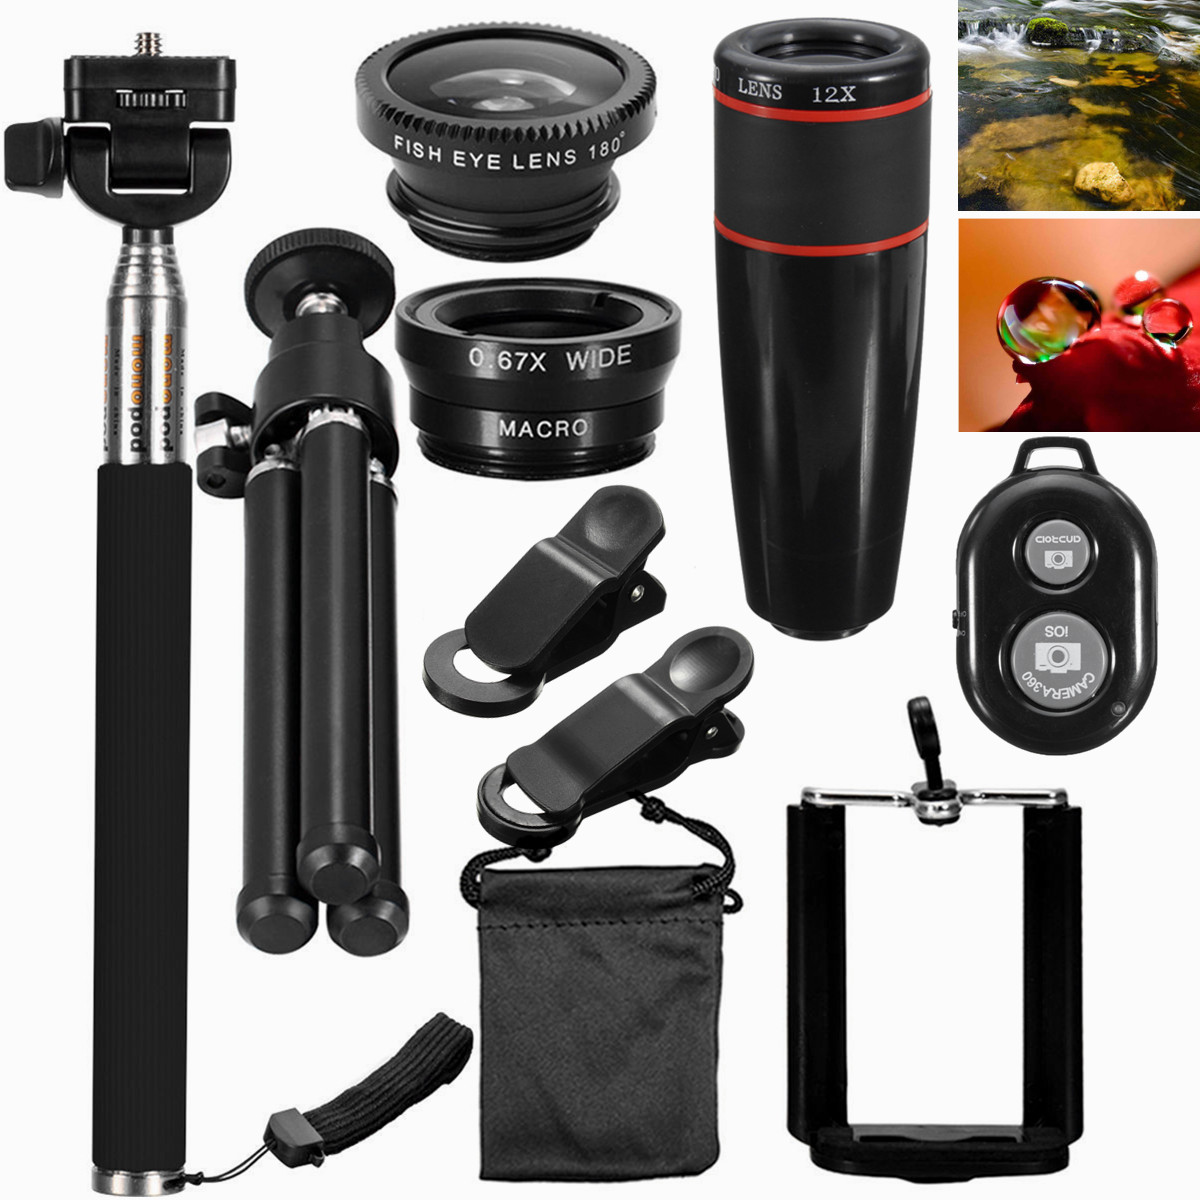 

Universal Travel Set All-in-one 12X 3 In 1 Lens+Telescope + Tripod + Clip + Remote Control for Phone